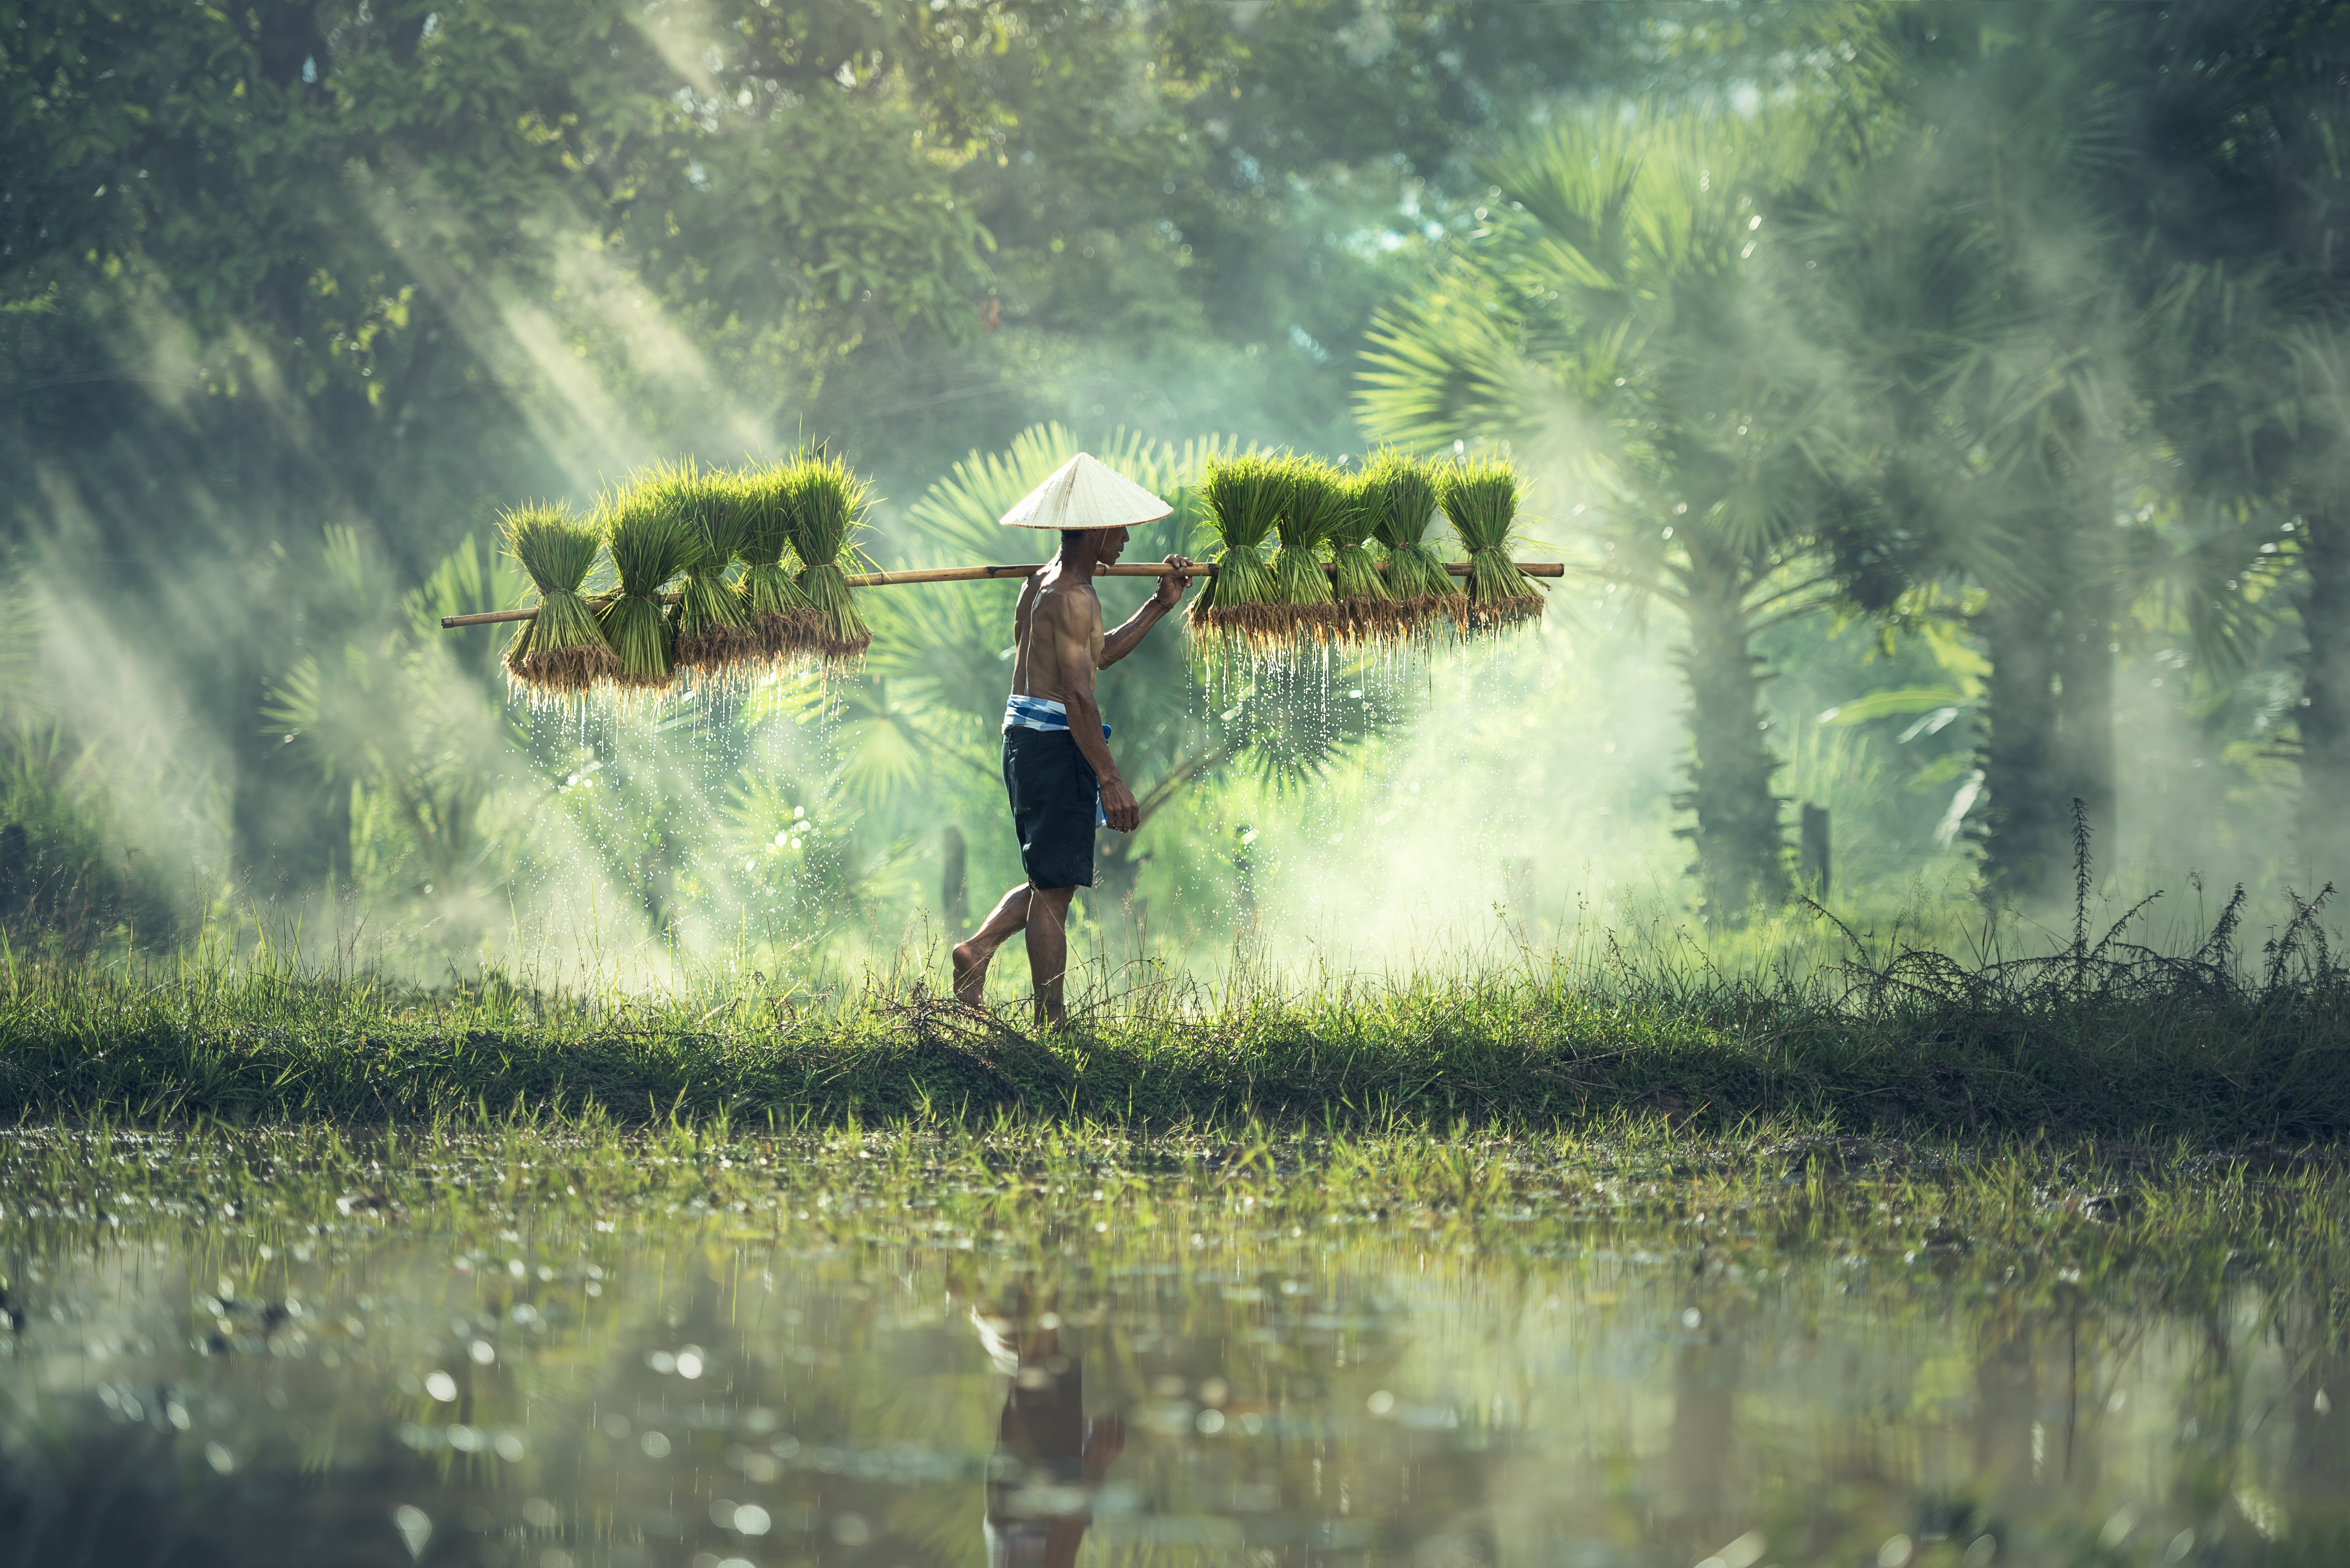 People 7360x4912 Cambodia men Agro (Plants) sun rays side view reflection Asia water water drops rice farming rice fields Asian conical hat nón lá mist shirtless